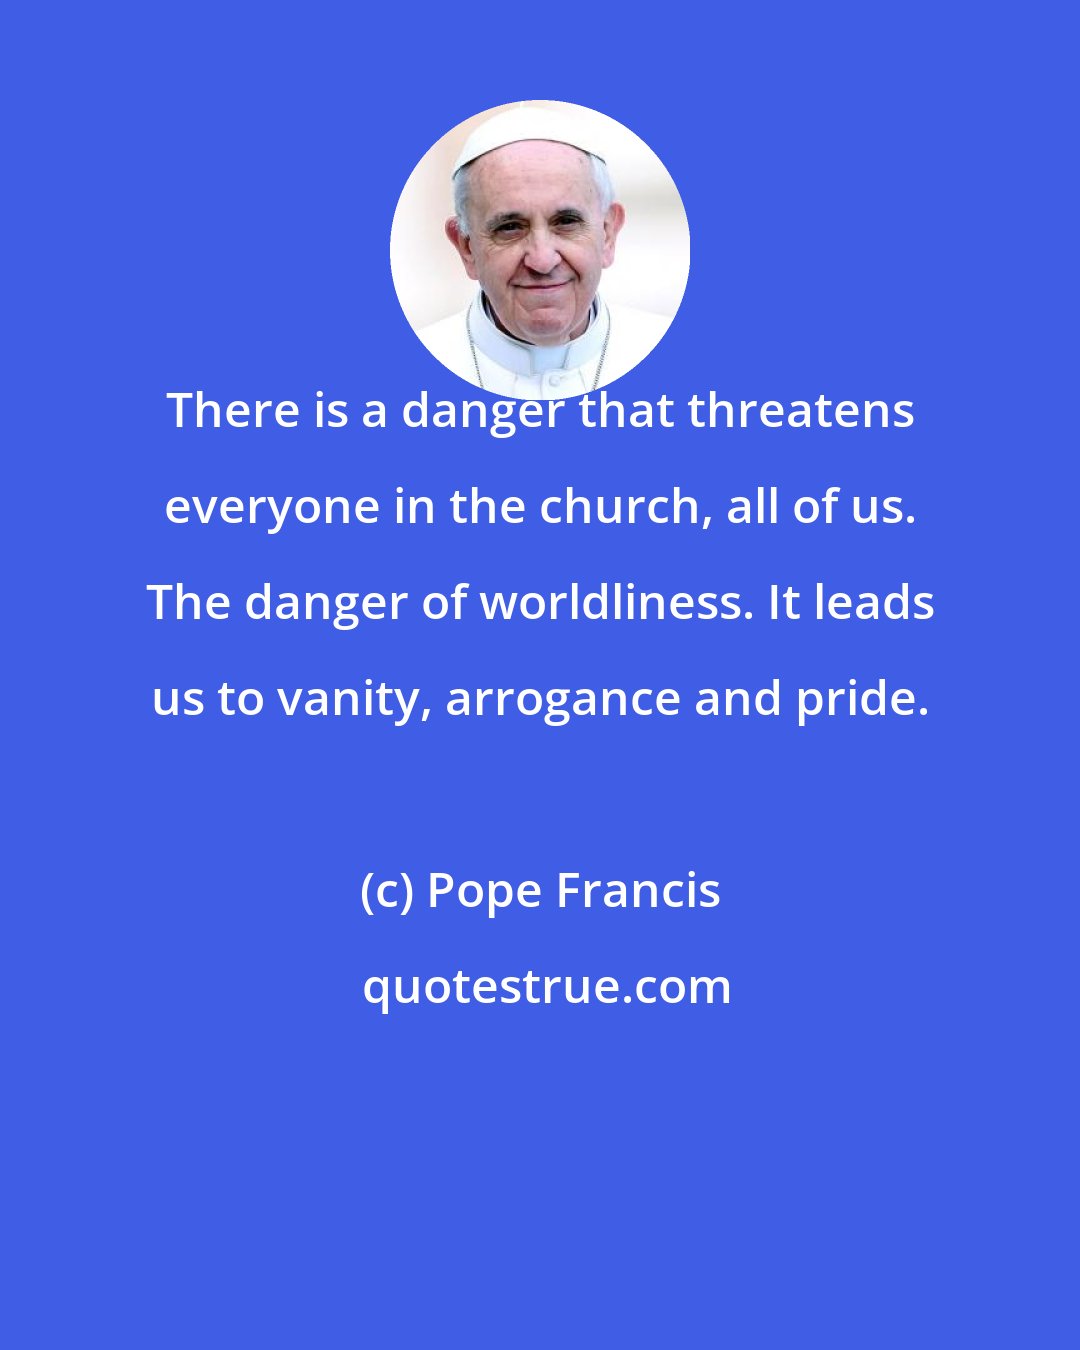 Pope Francis: There is a danger that threatens everyone in the church, all of us. The danger of worldliness. It leads us to vanity, arrogance and pride.